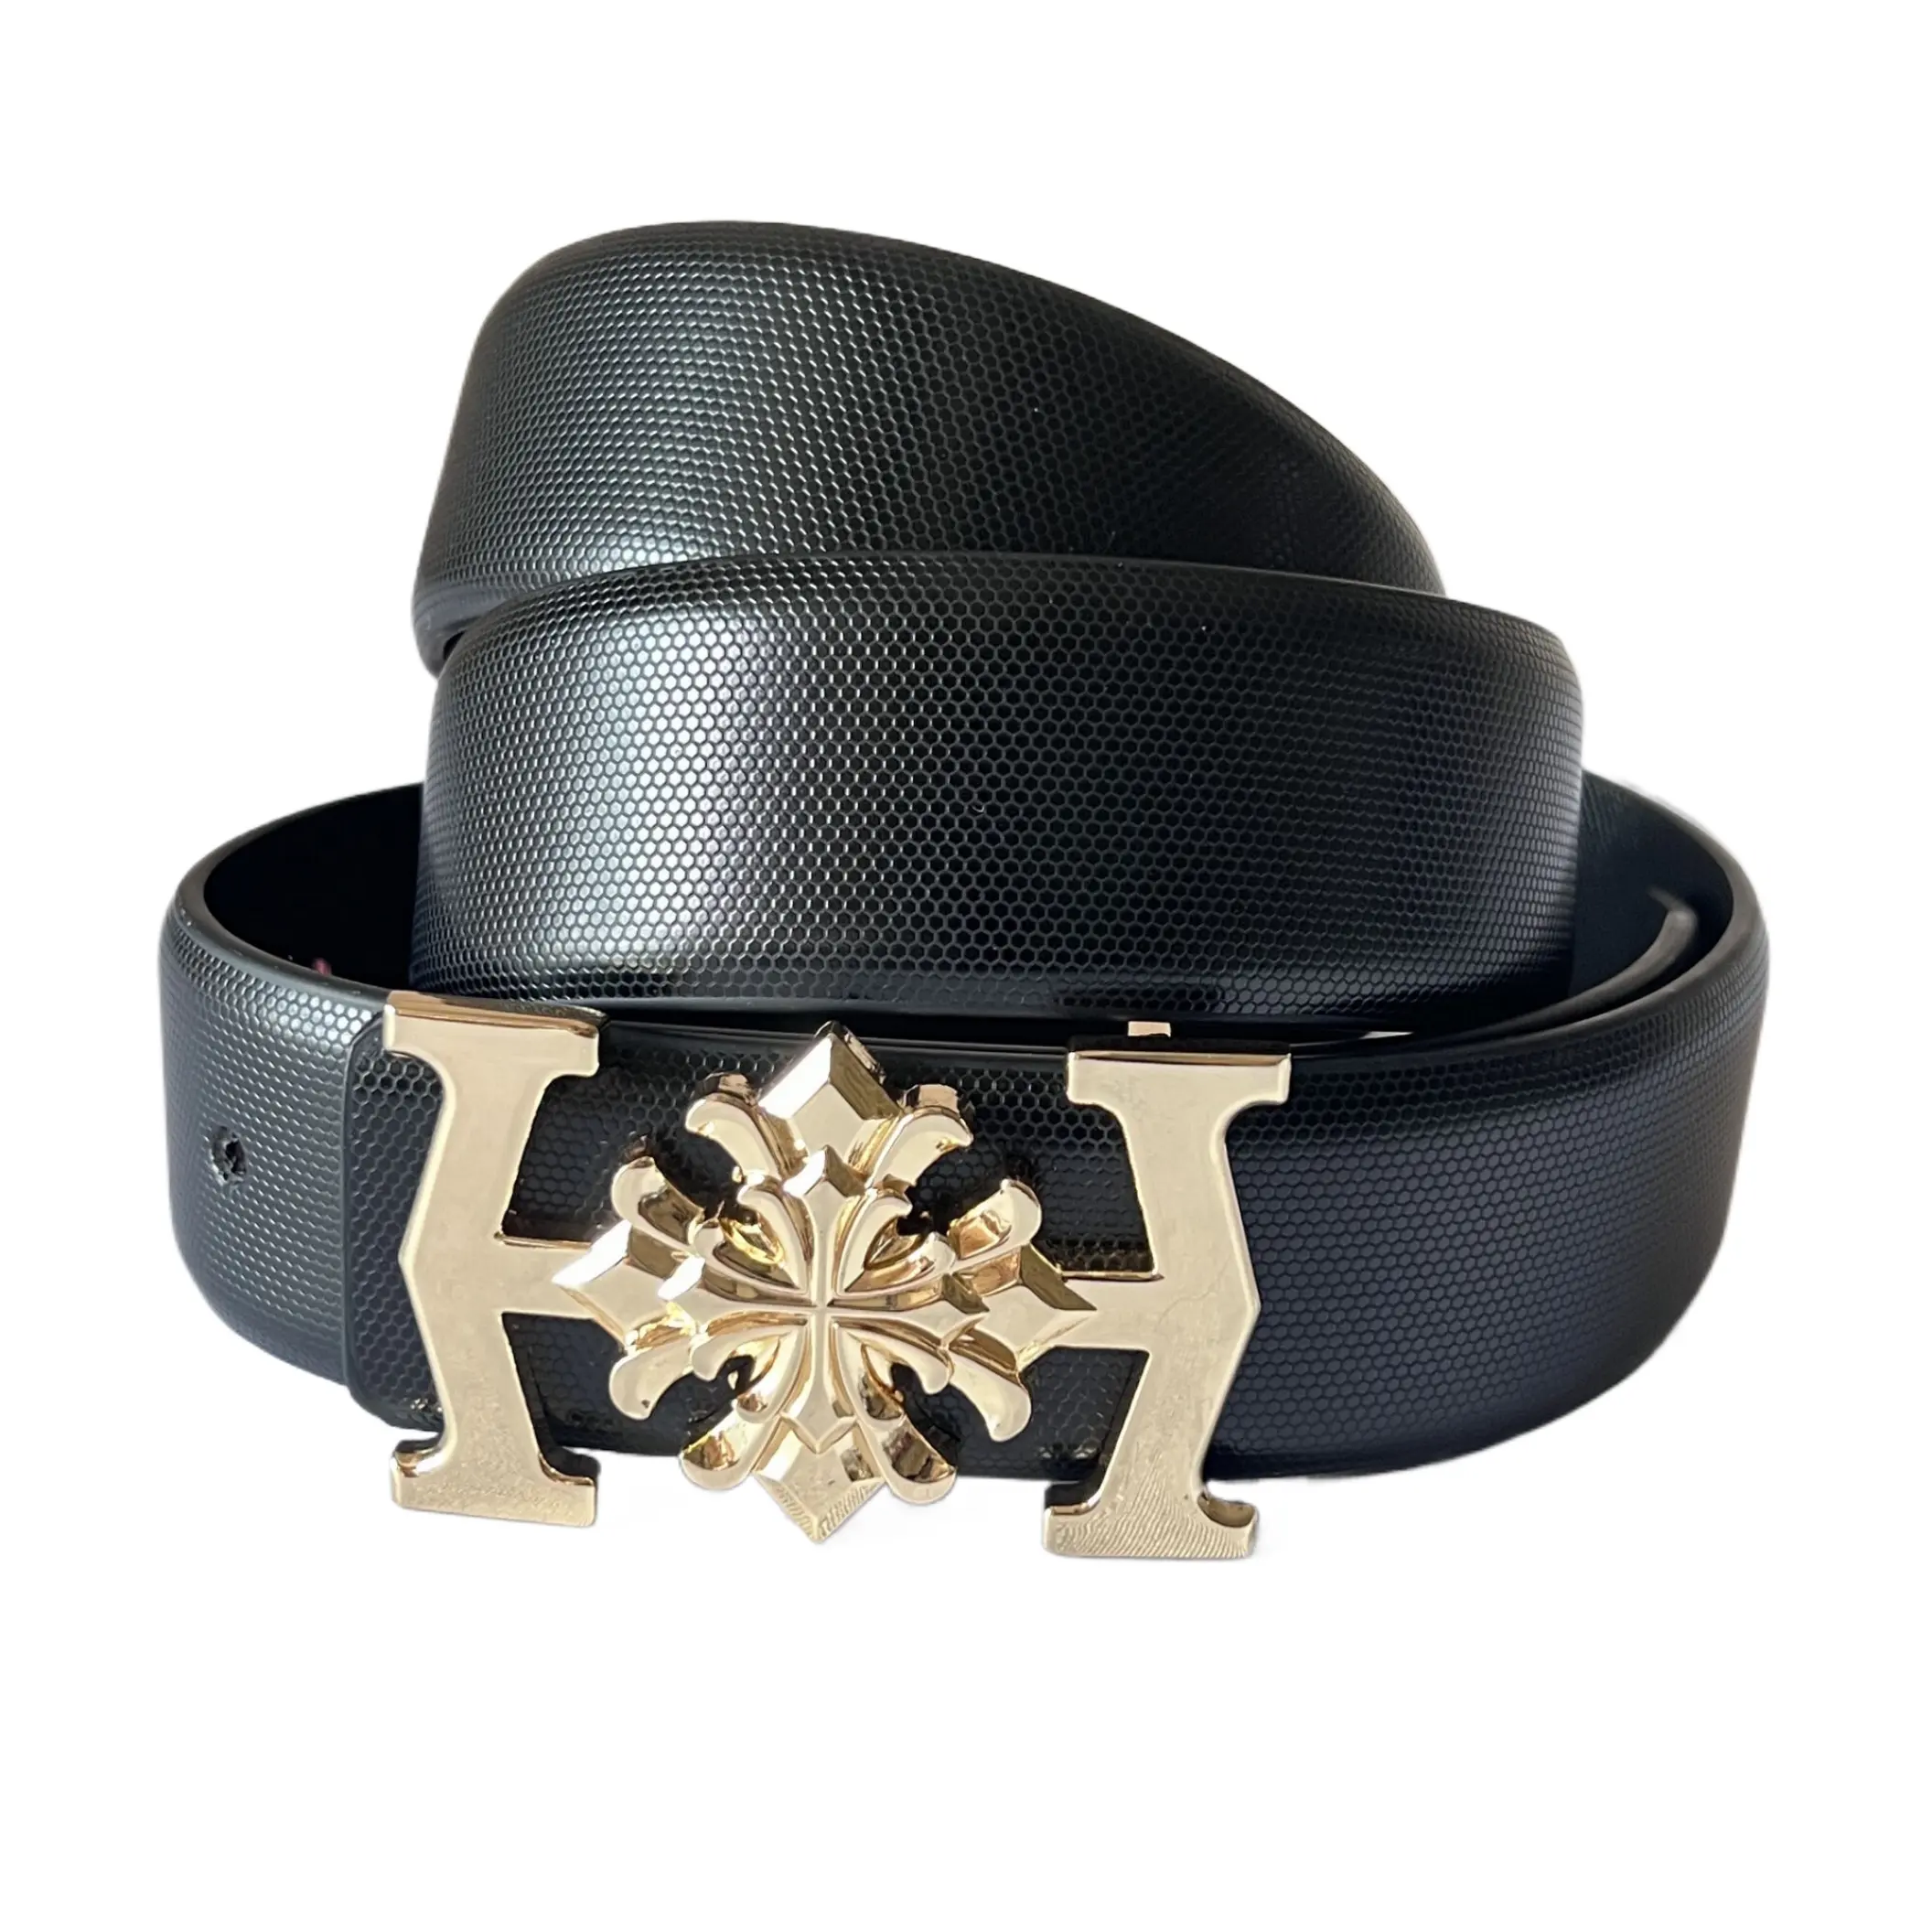 Belt leather custom leather belts men and women design can custom with new flower gold buckle